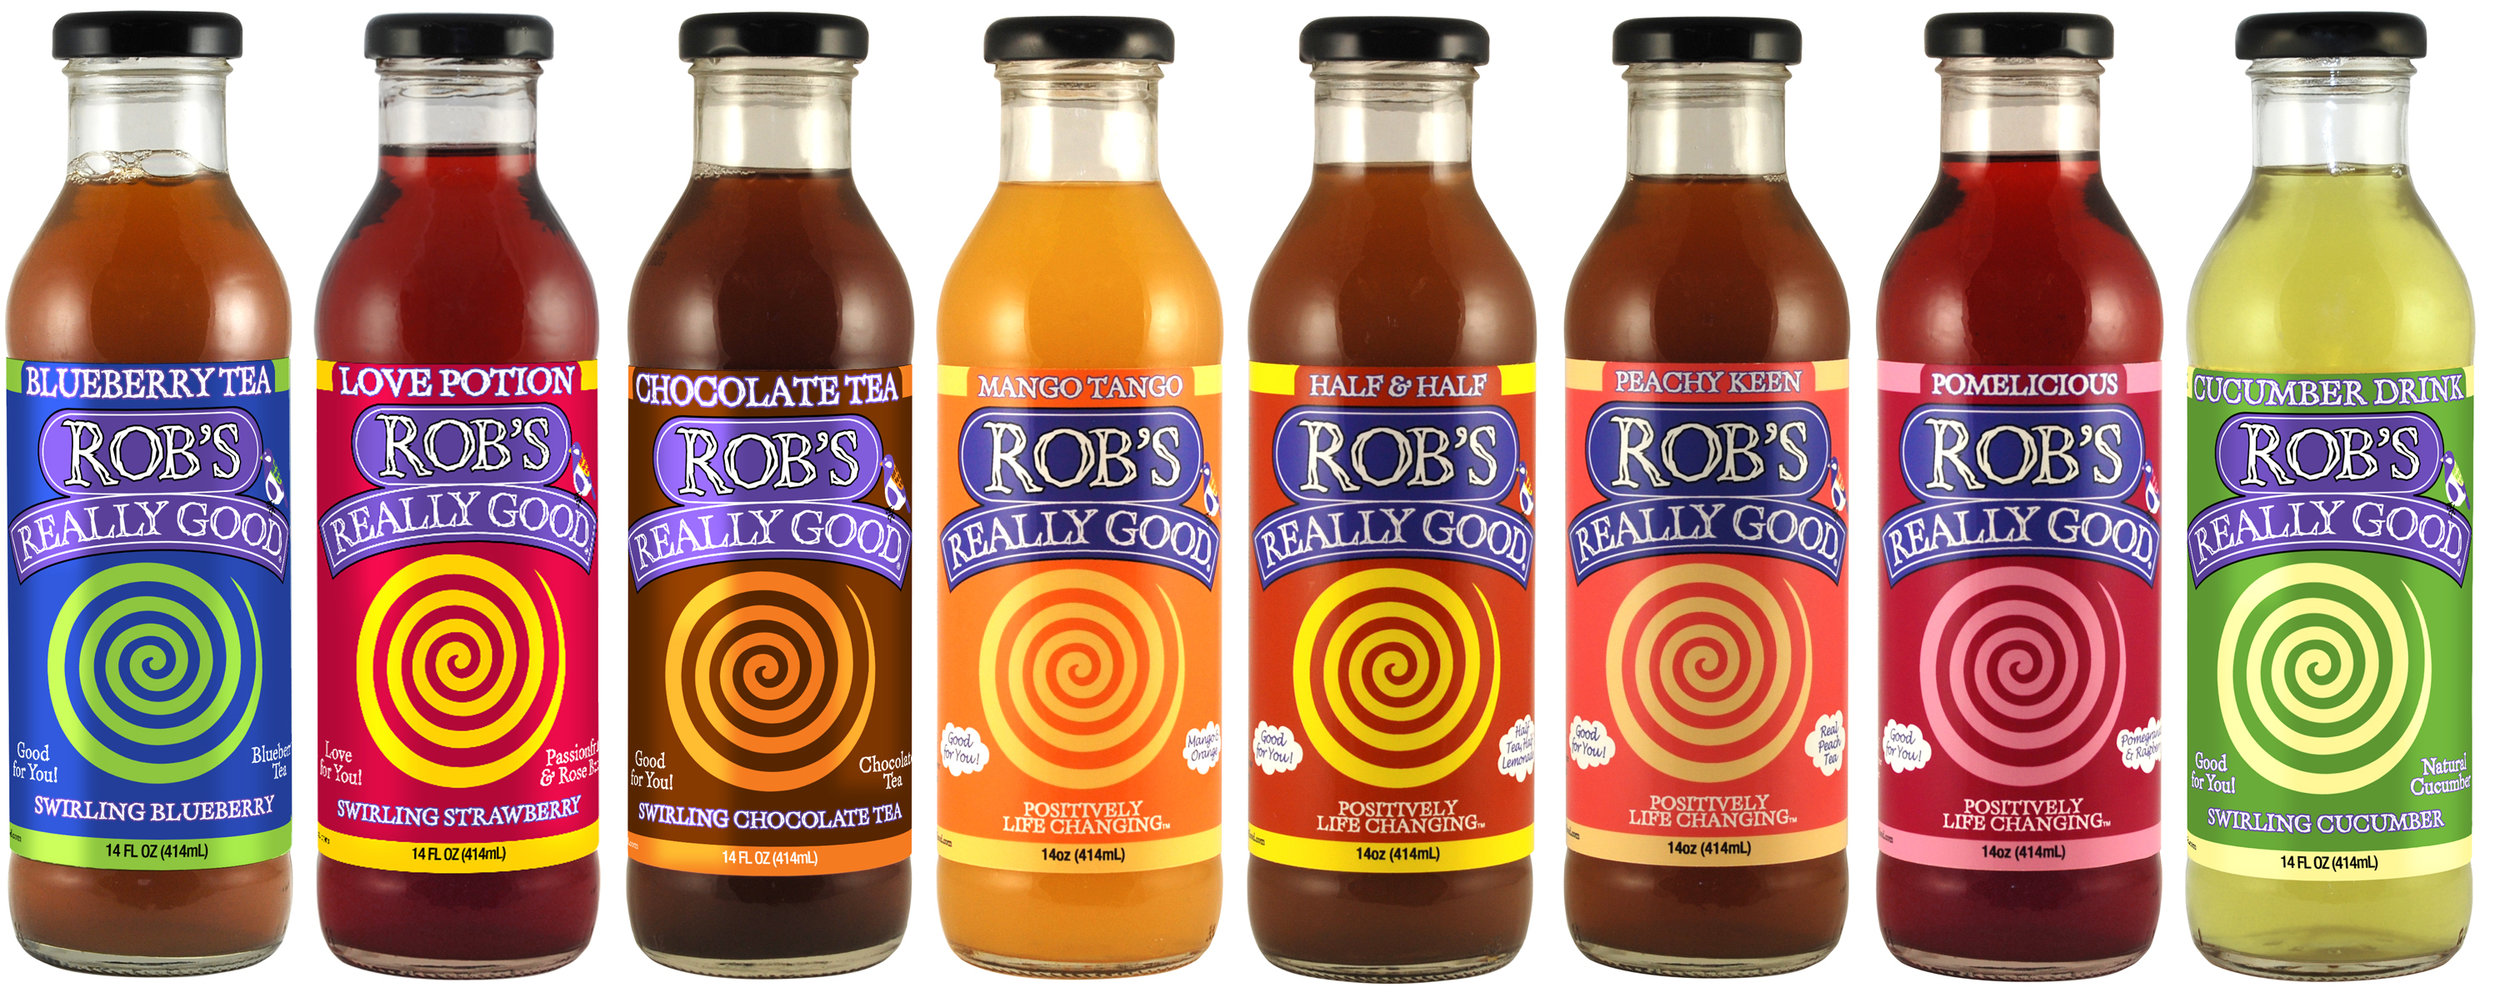  Rob's Really Good first line of teas and juices&nbsp; 